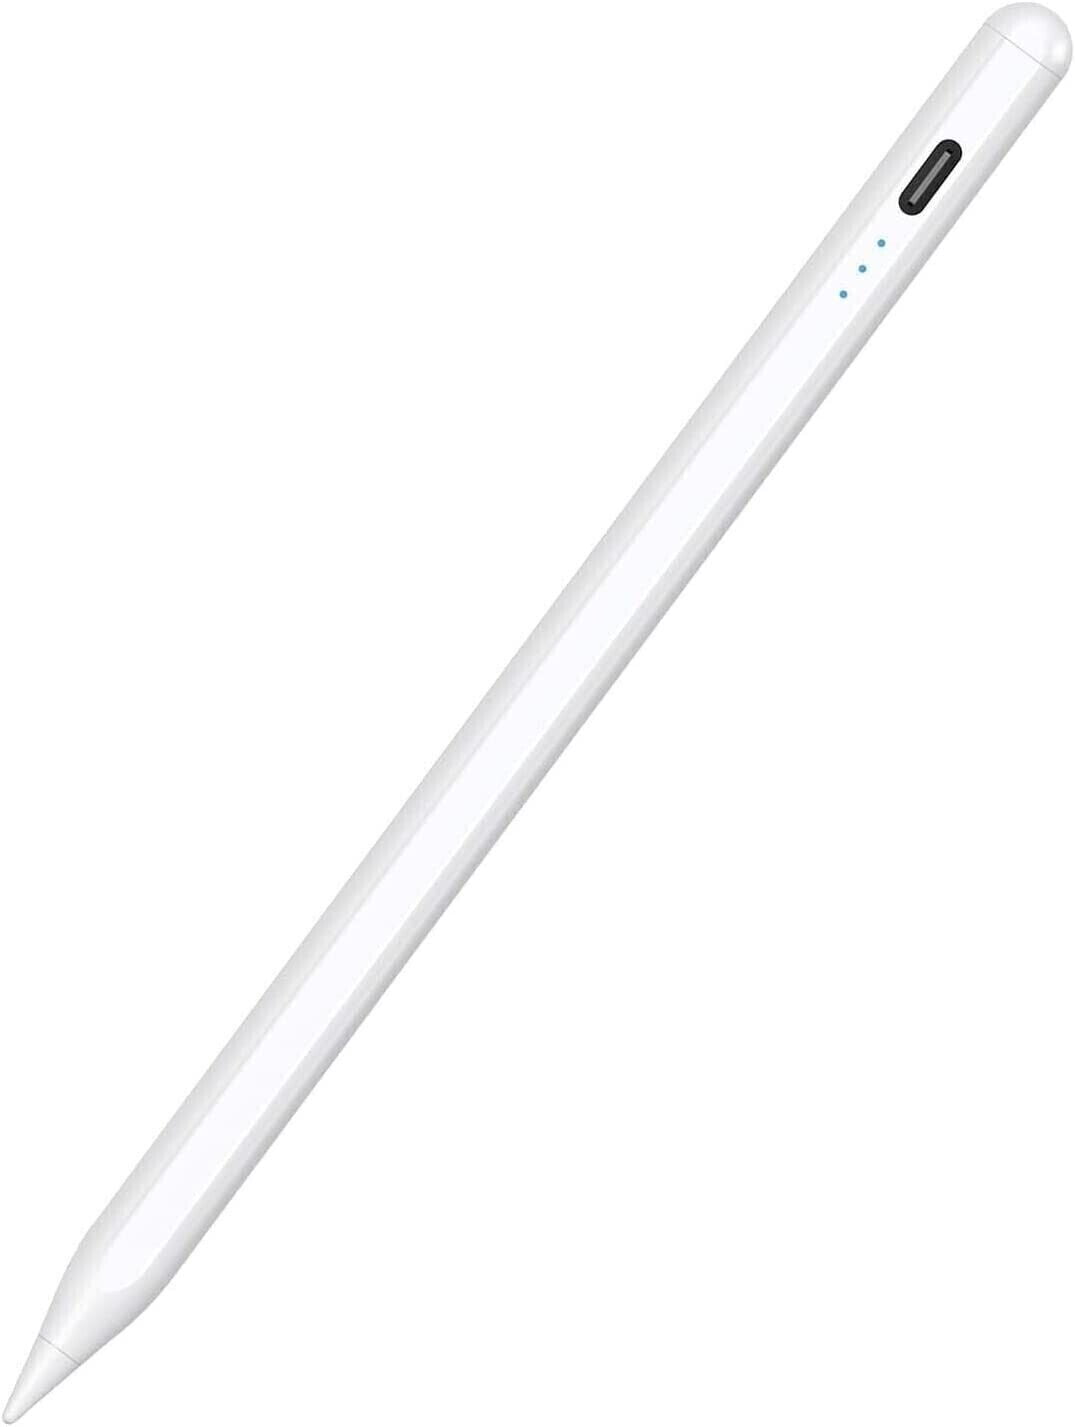 Apple Pencil (2nd Generation) - Education Price!